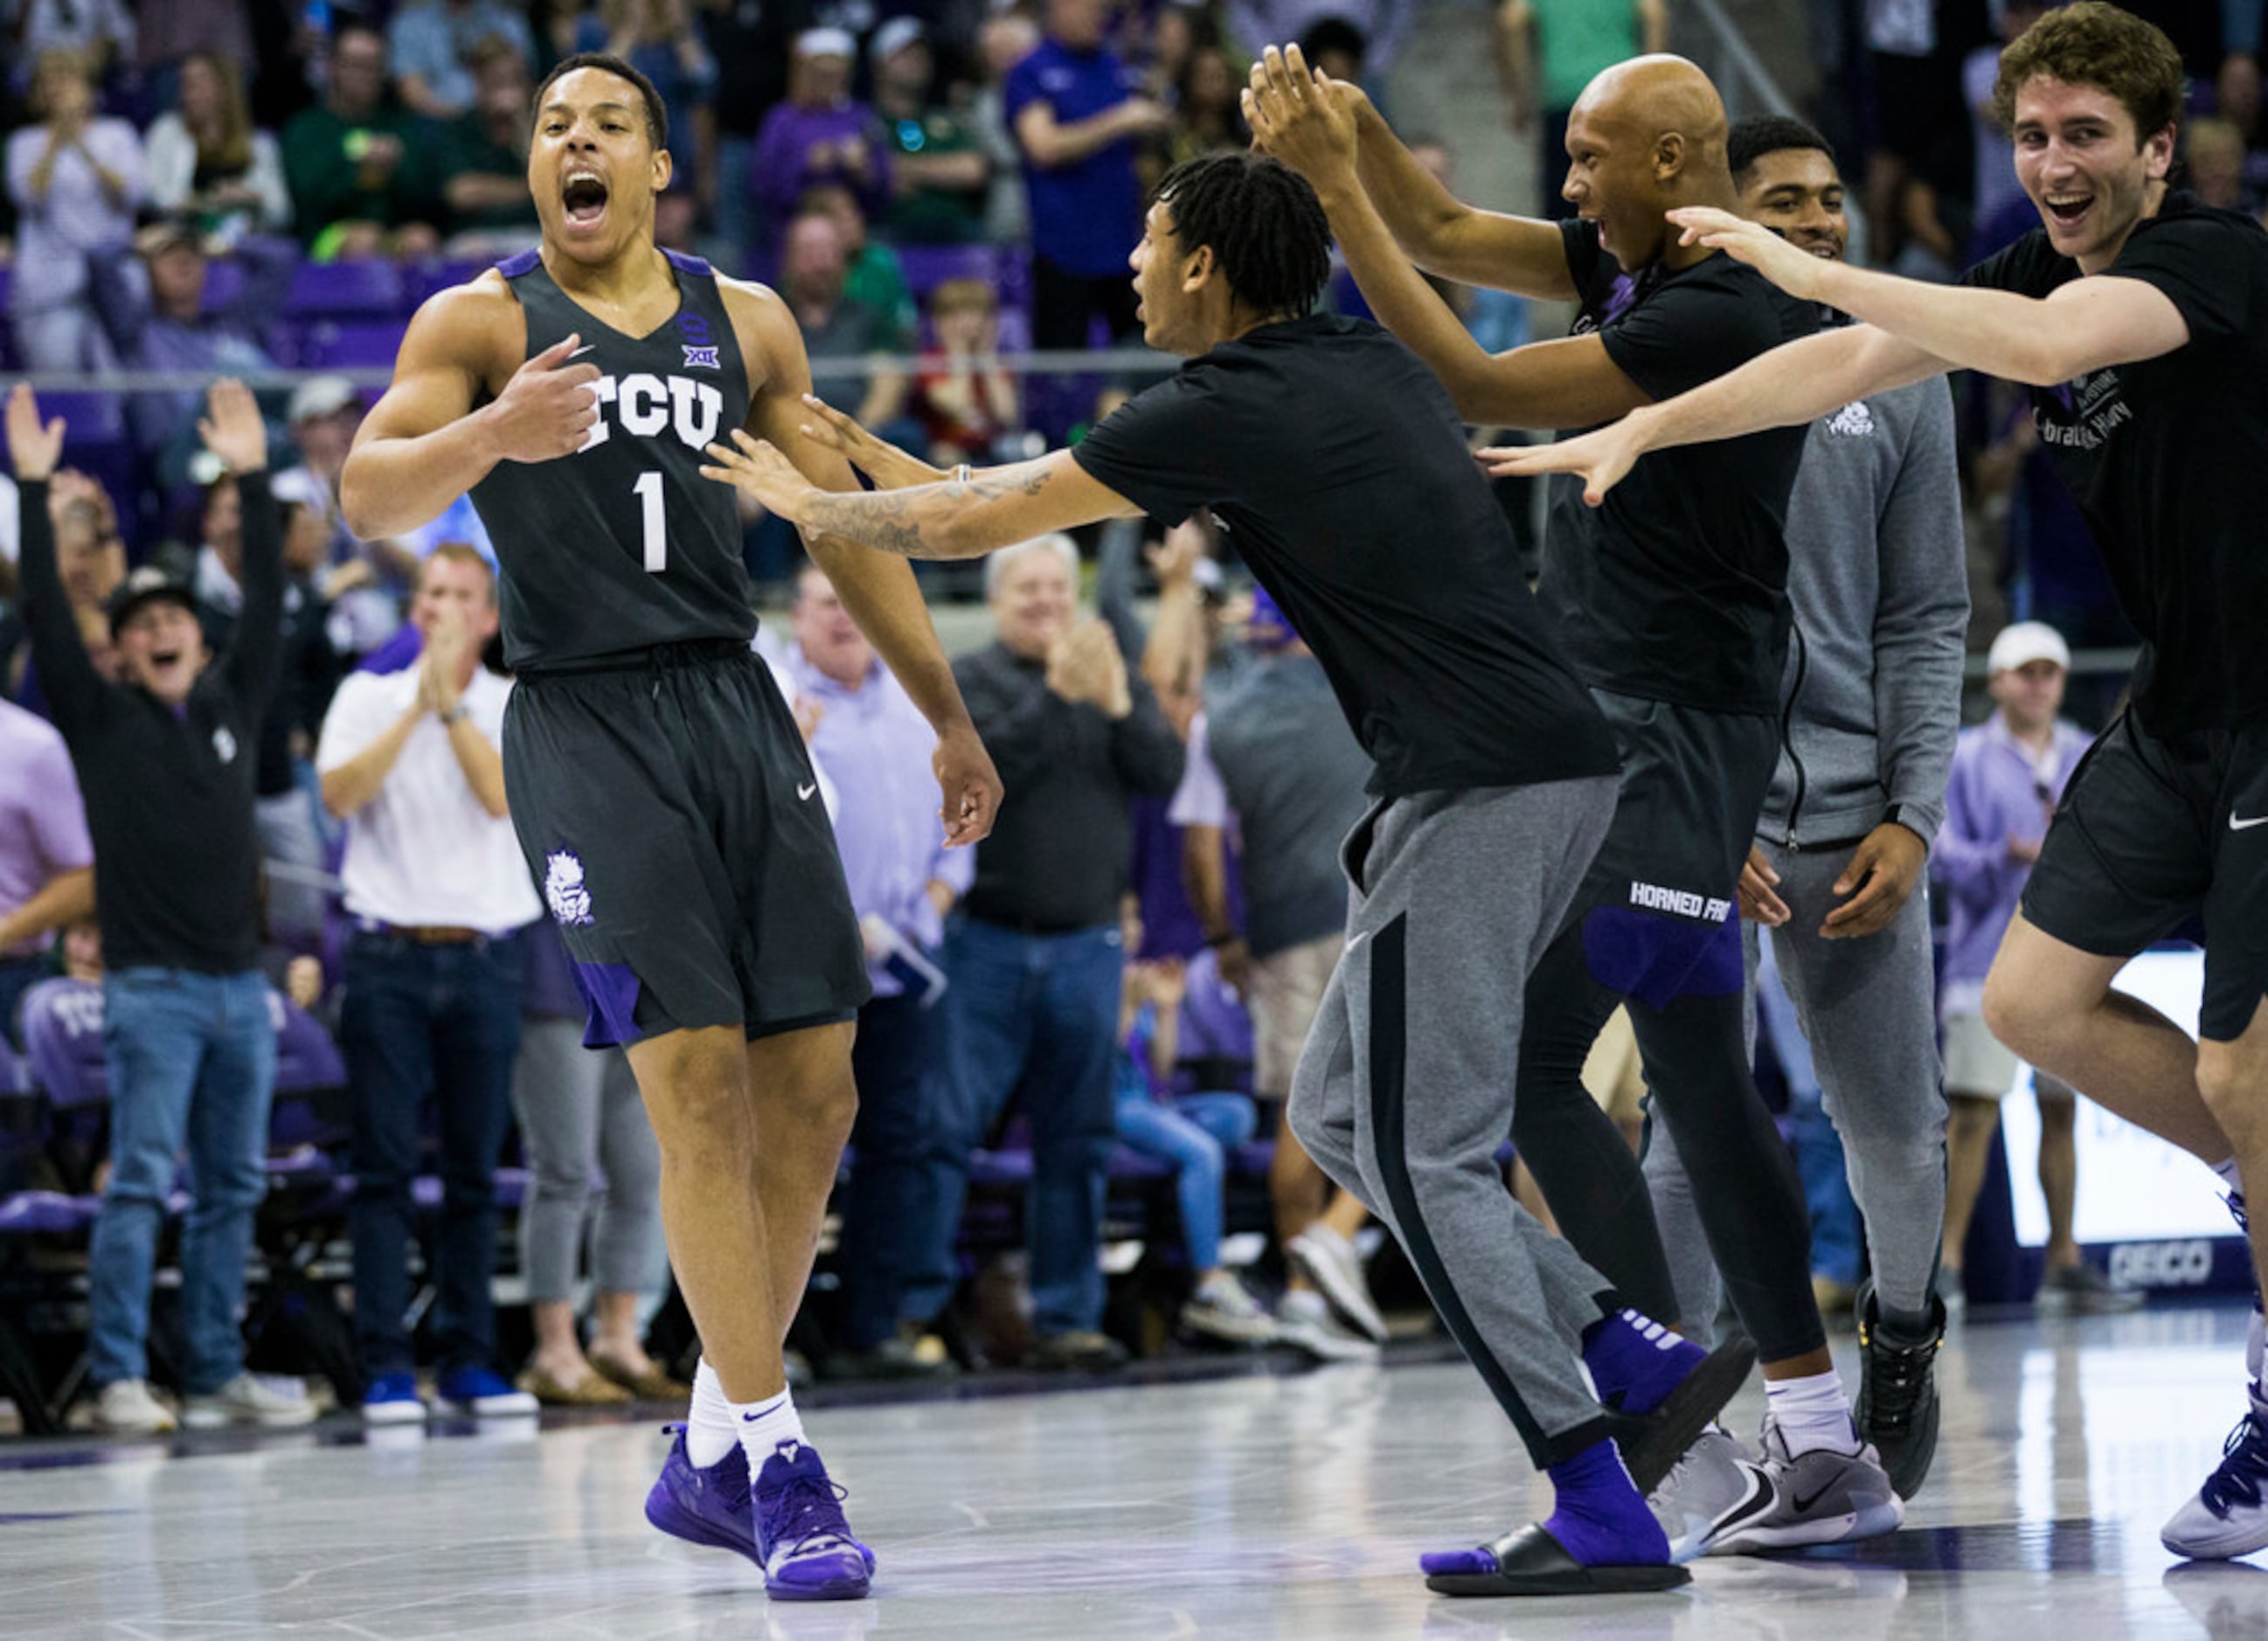 NBA Draft 2020: TCU's Desmond Bane could be a good pick for Sixers